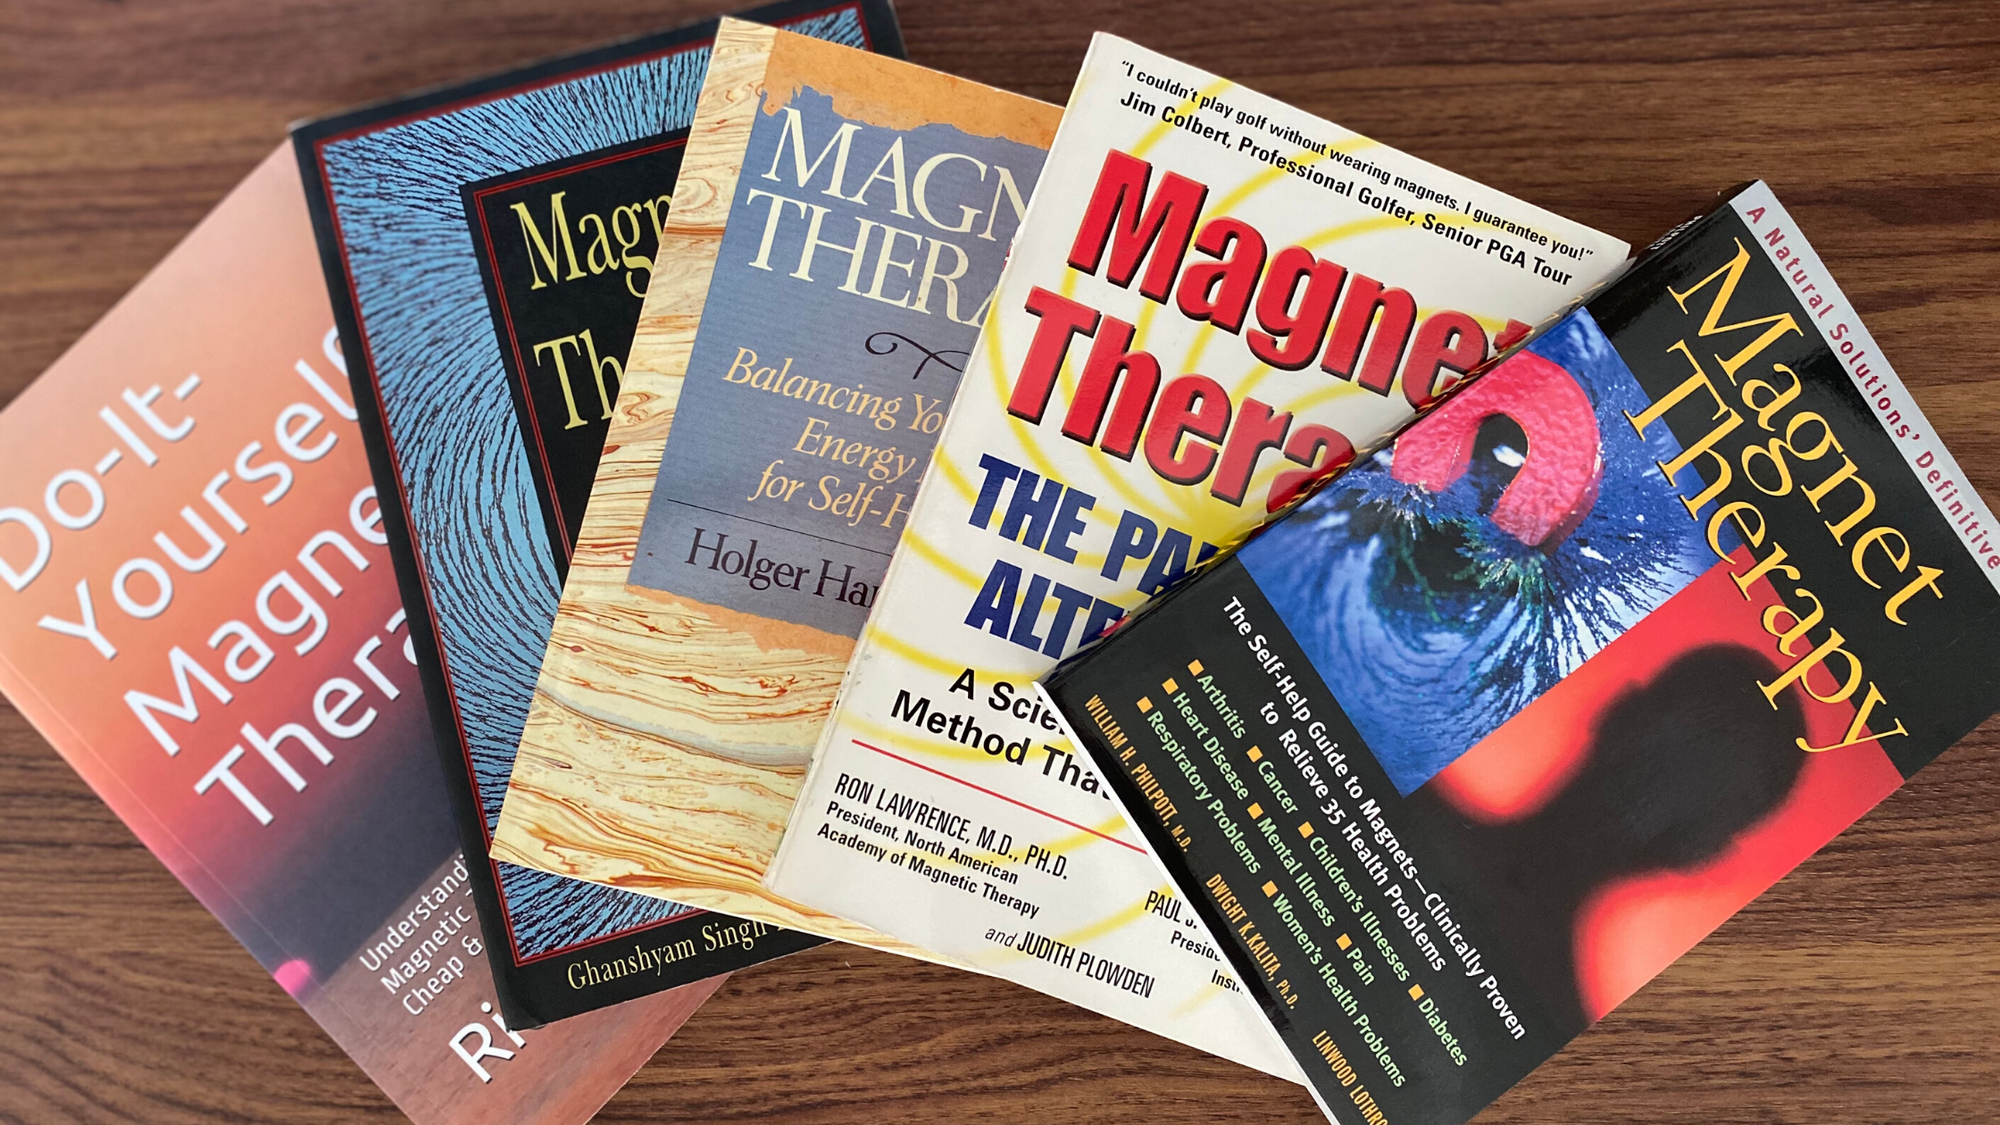 Best books on magnet therapy and magnetic therapy